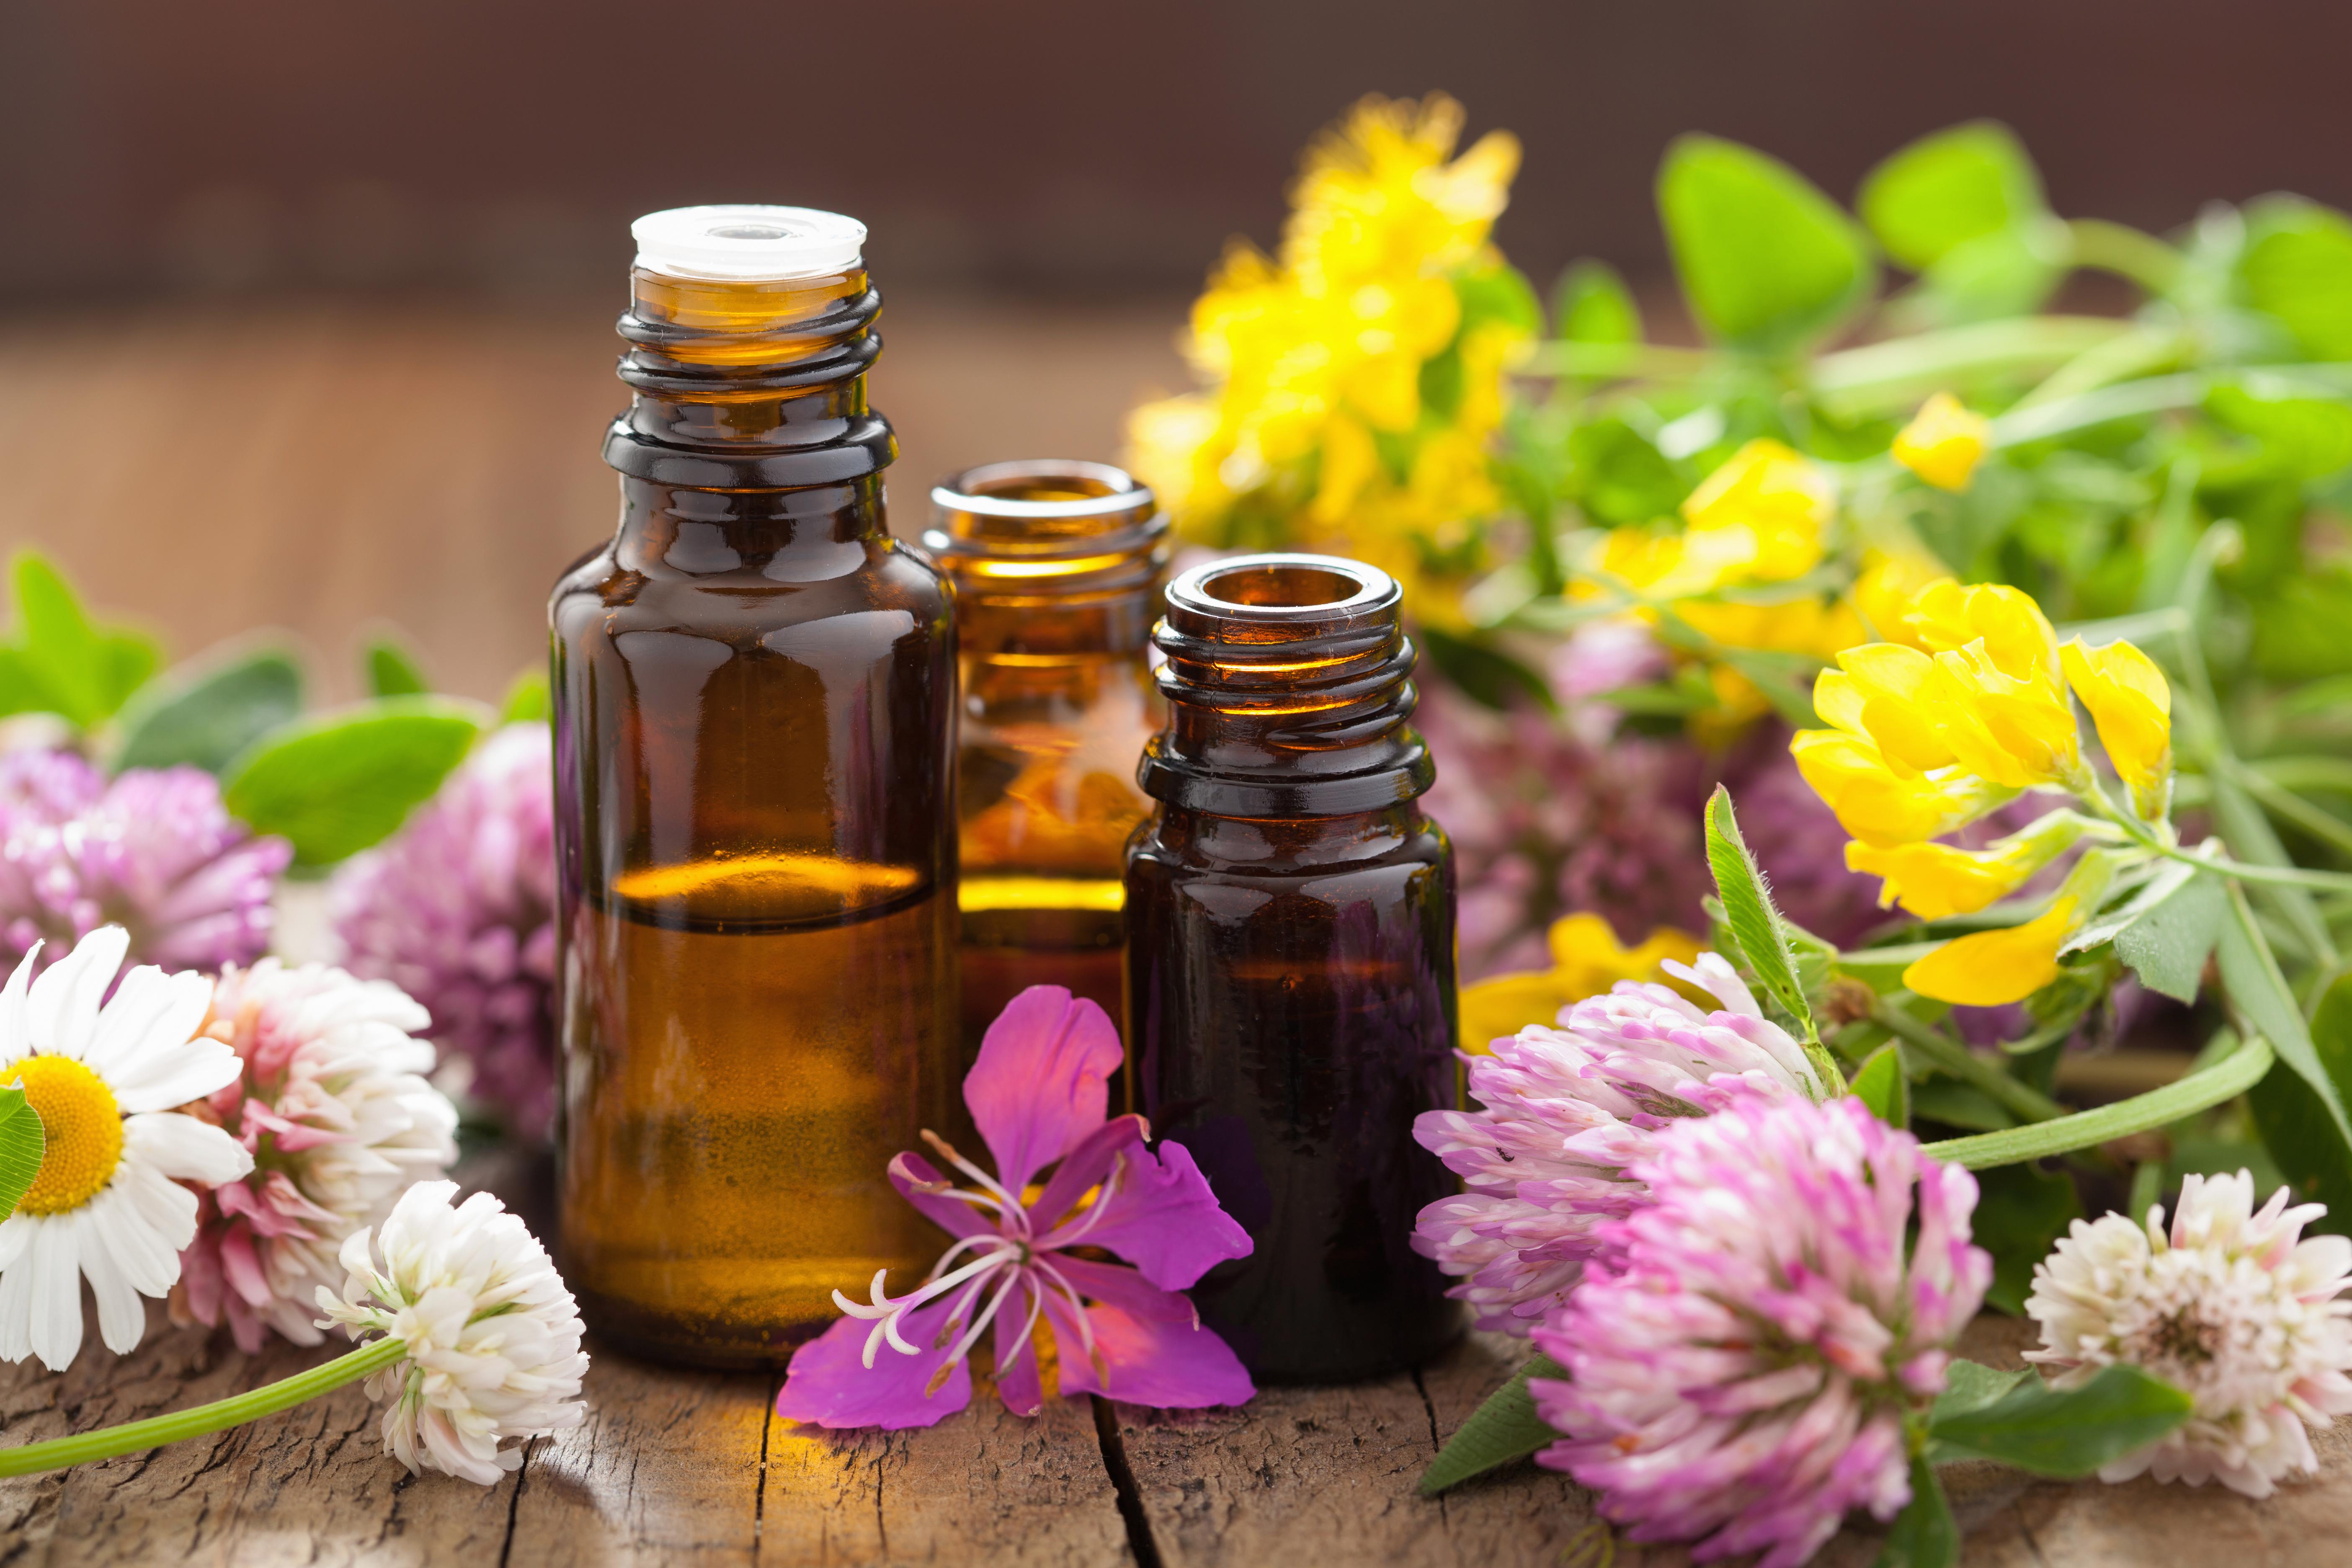 Getting Started with Essential Oils - Corona